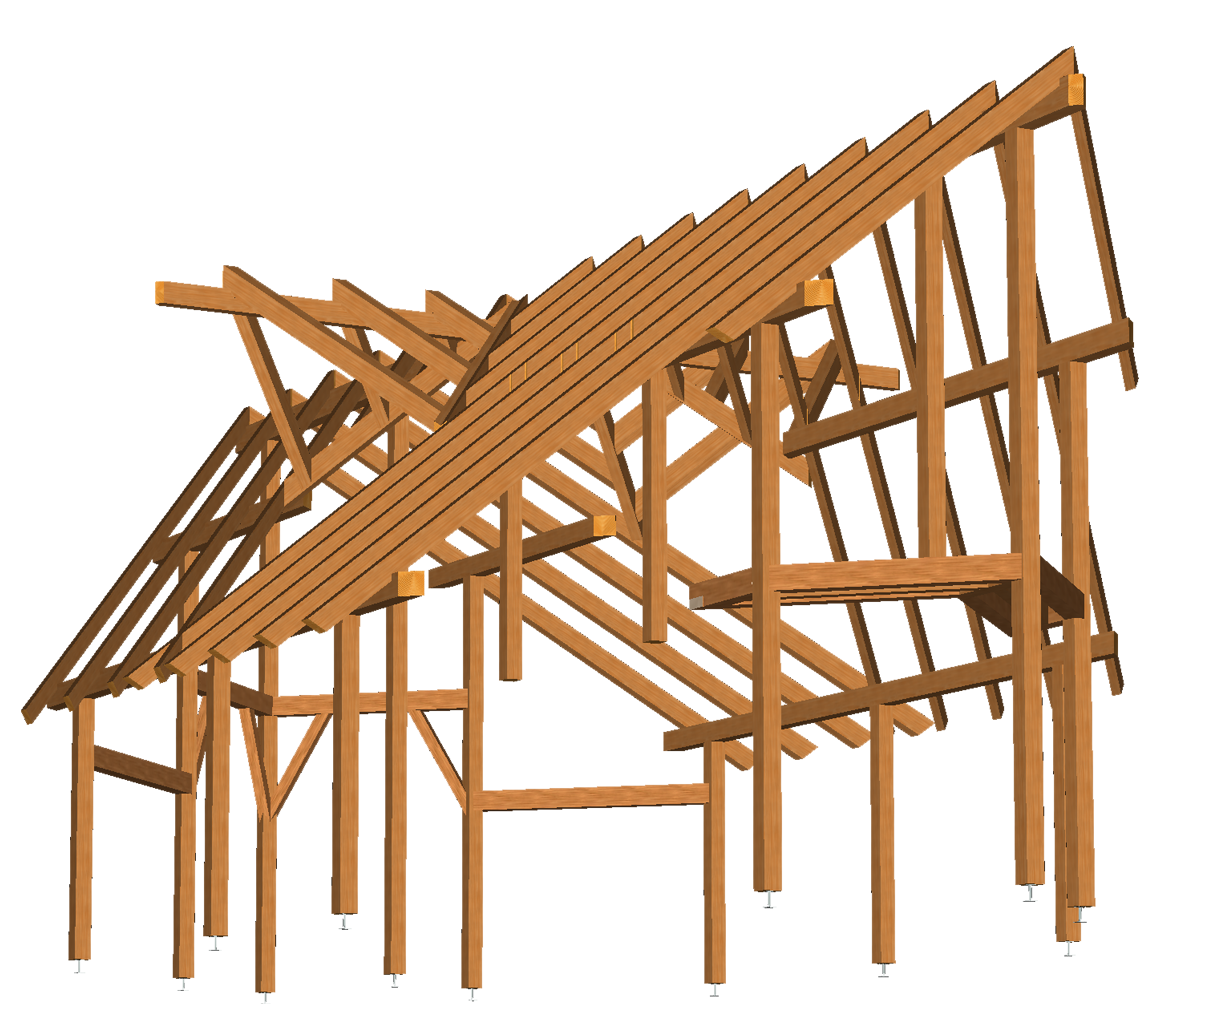 1.1 Types of Timberframe Joinery